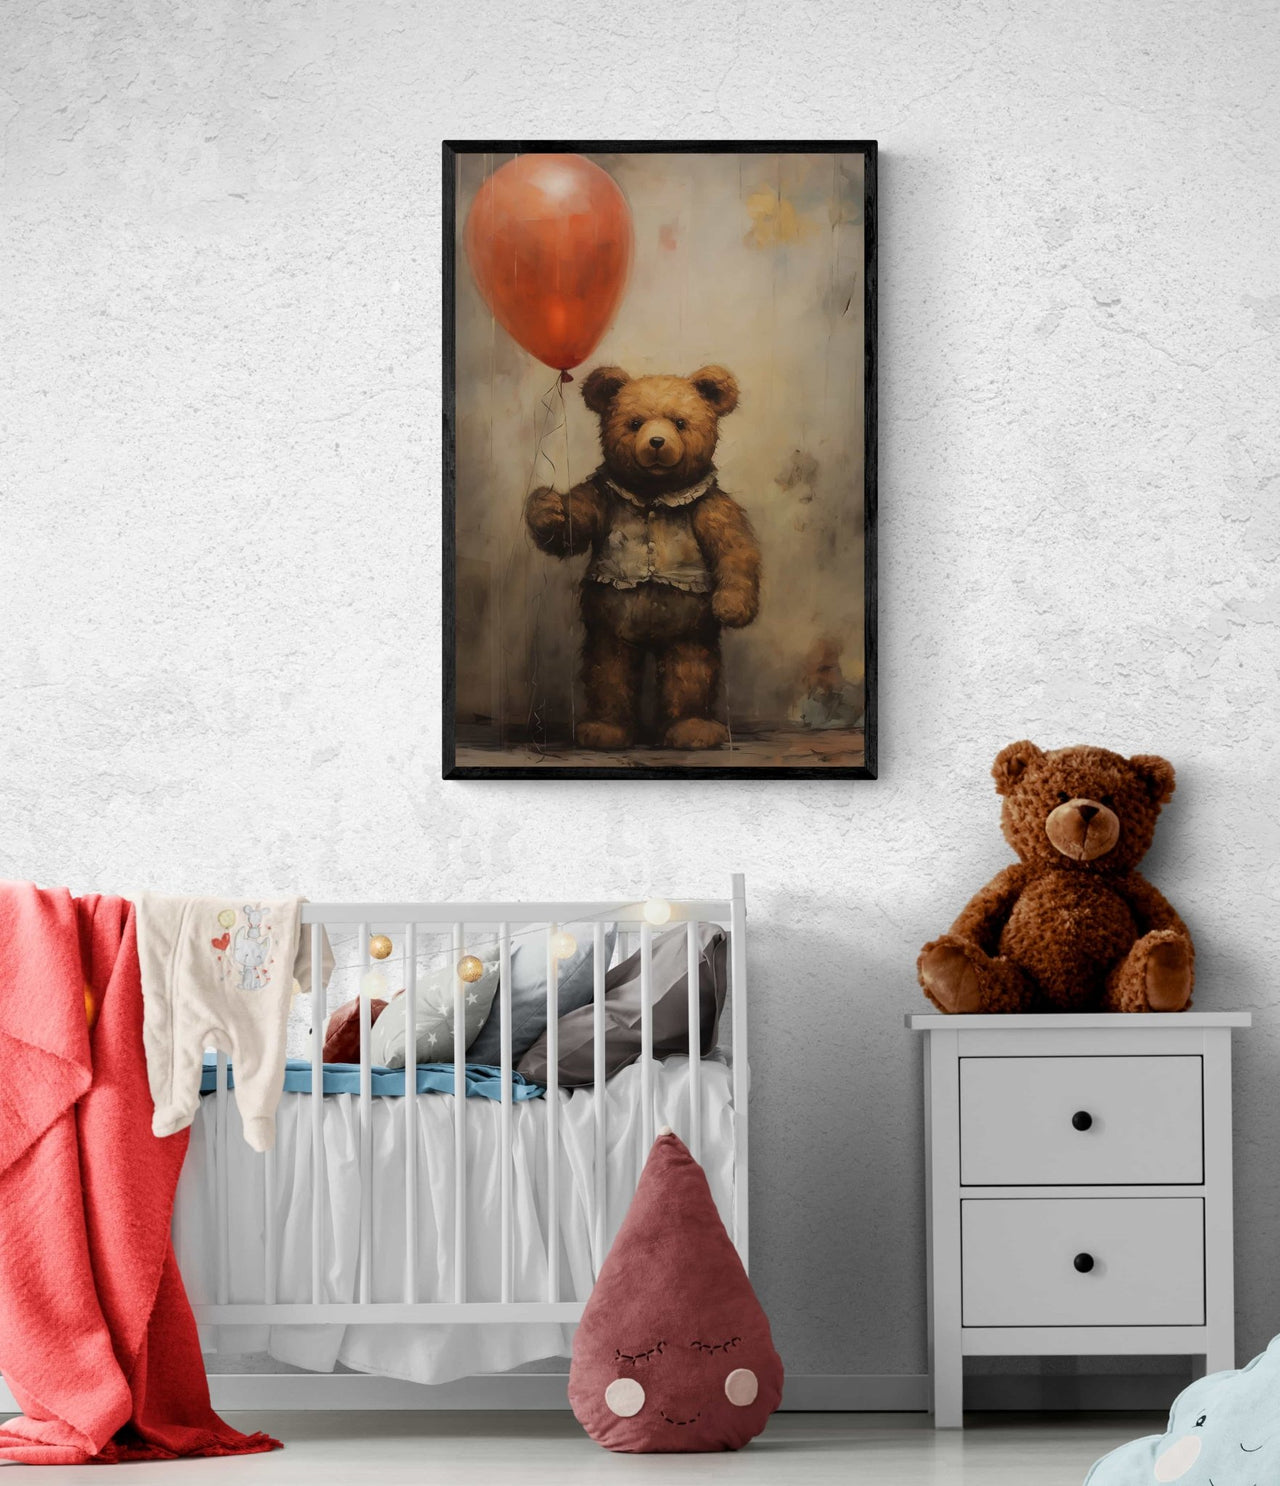 Encaustic Oil Painting: Teddy Bear with Red Balloon Framed Canvas - Pine Tree Frame - Milton Wes Art Framed Wall Art